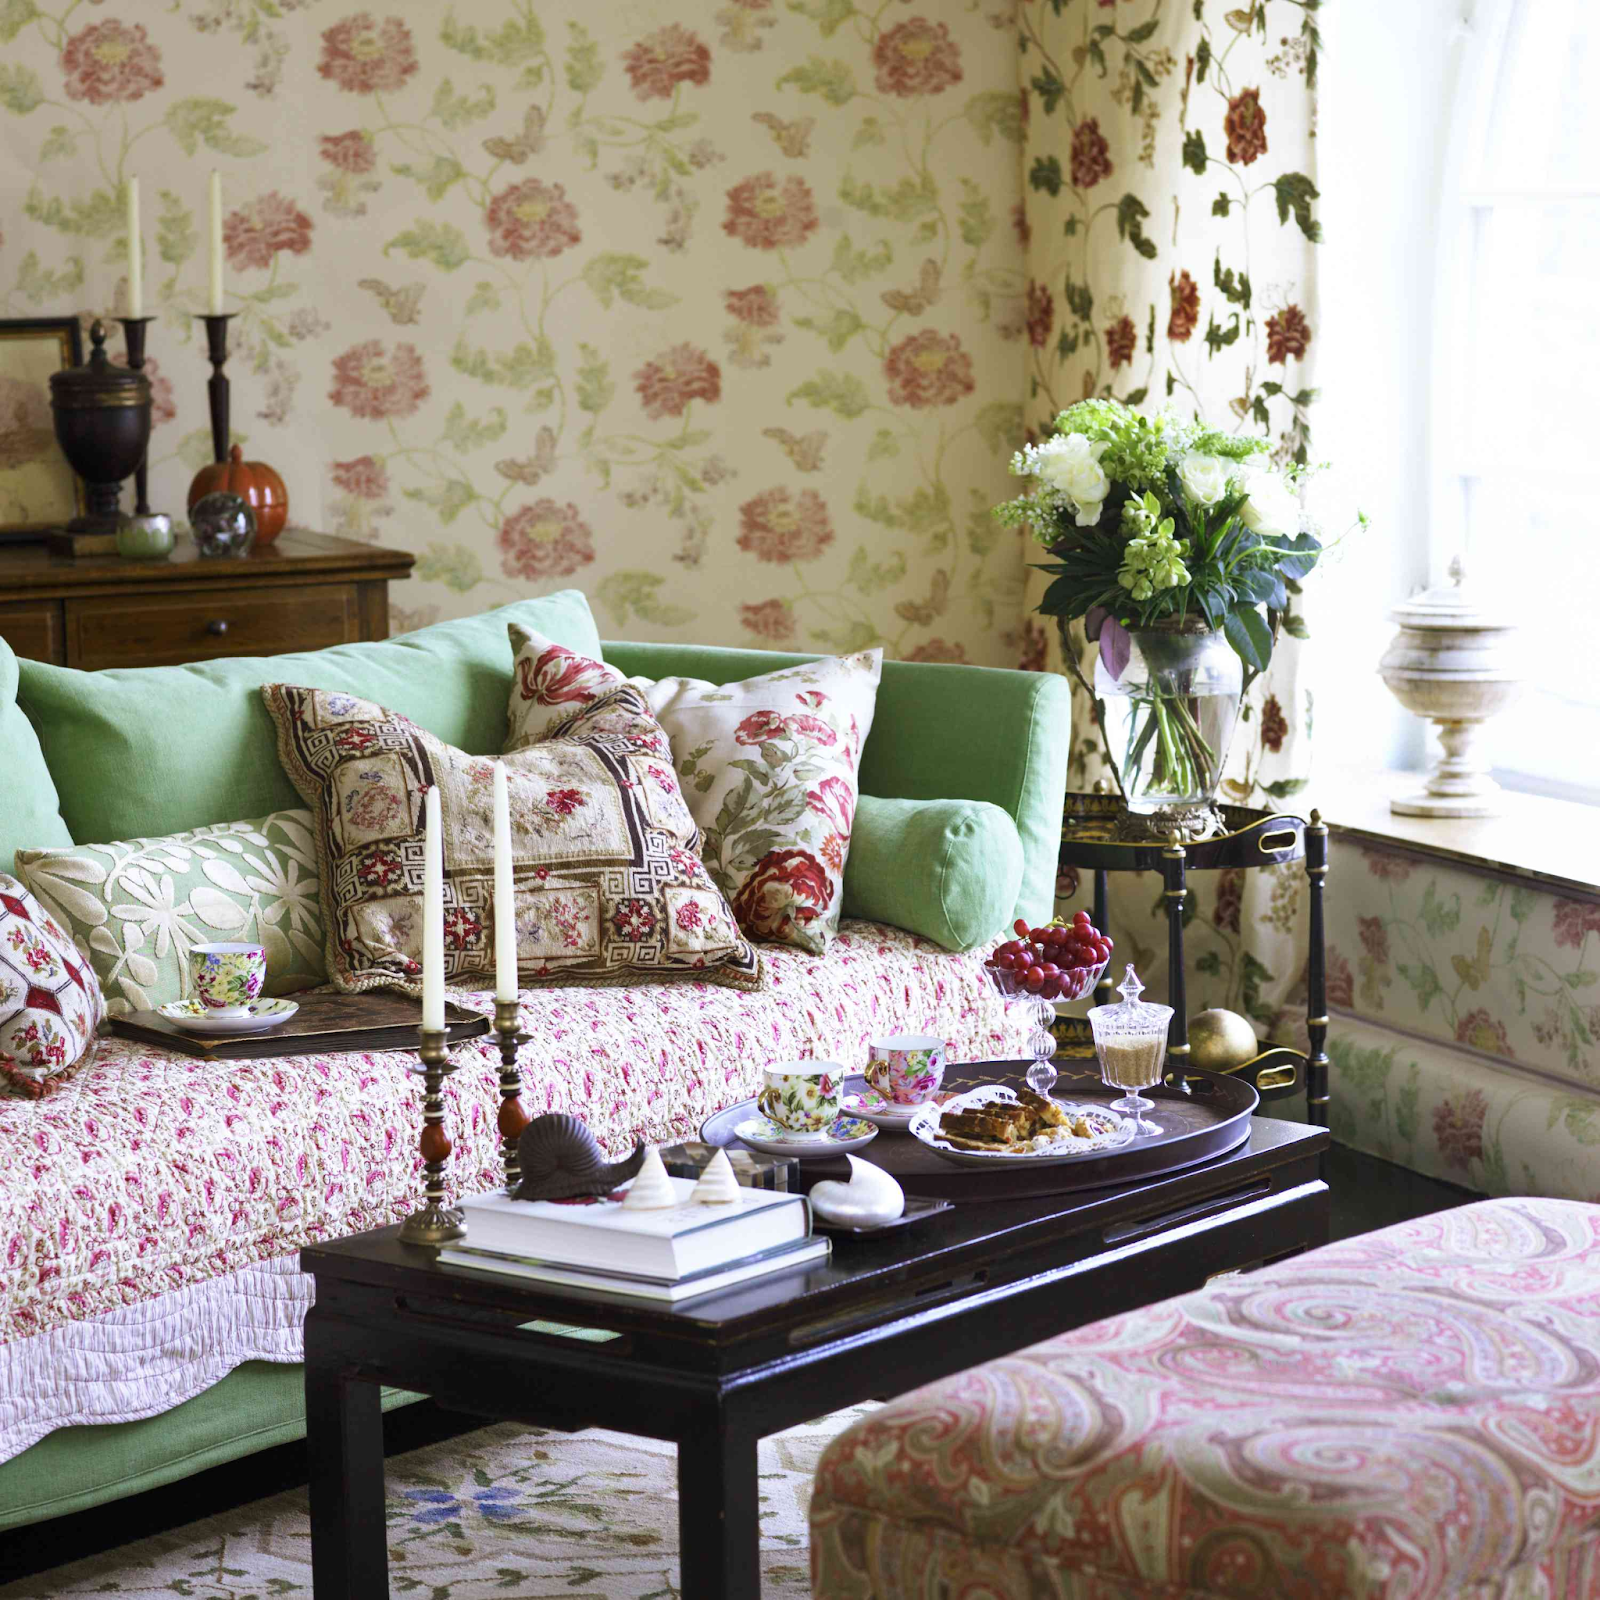 Granny chic design with chintz-style floral decor used for curtains, upholstery, and wallpaper